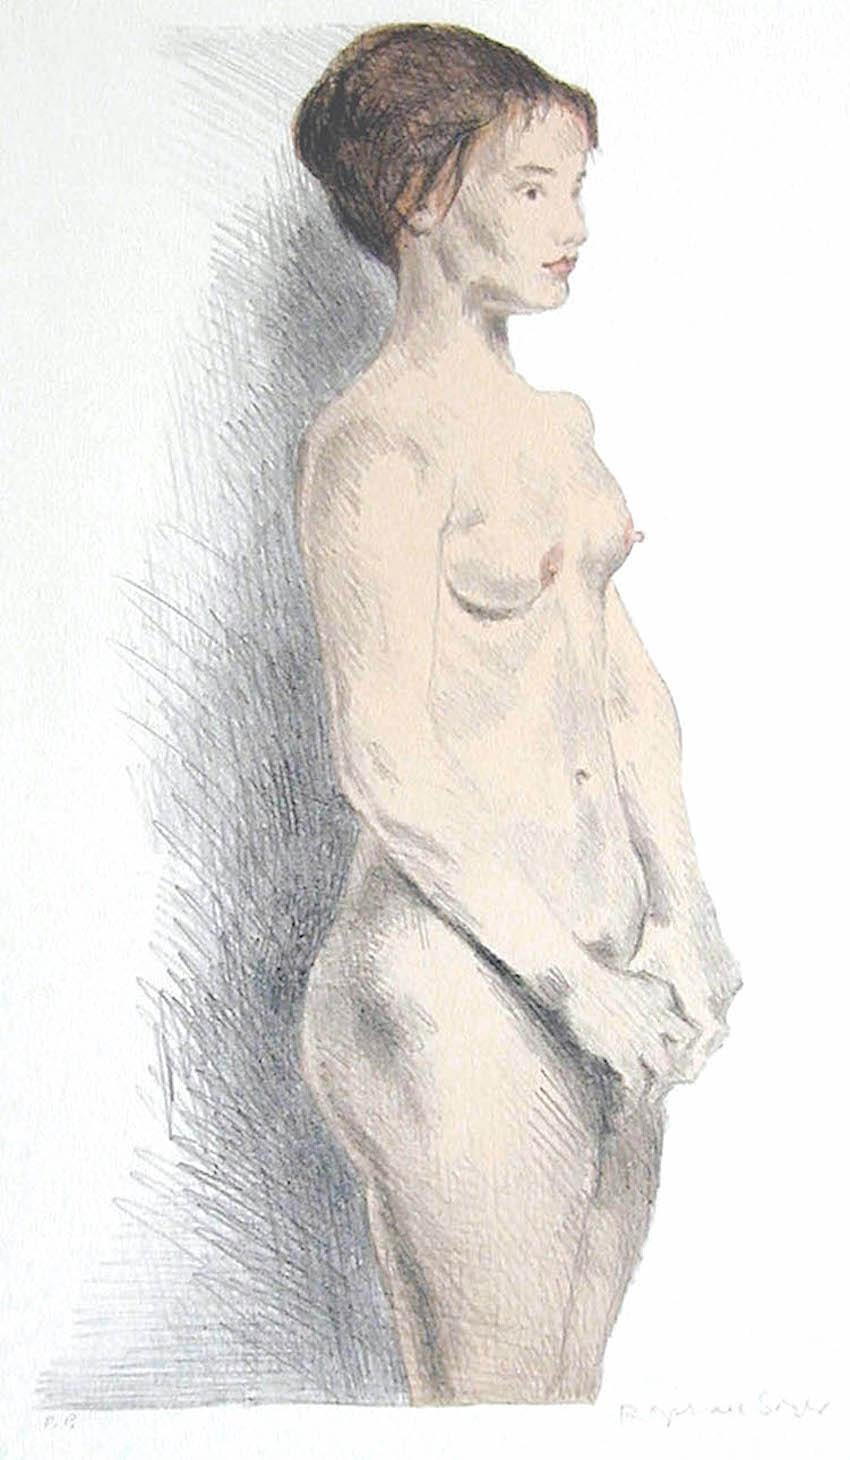 STANDING NUDE Signed Lithograph, Realist Portrait Young Woman, Figure Drawing - Print by Raphael Soyer